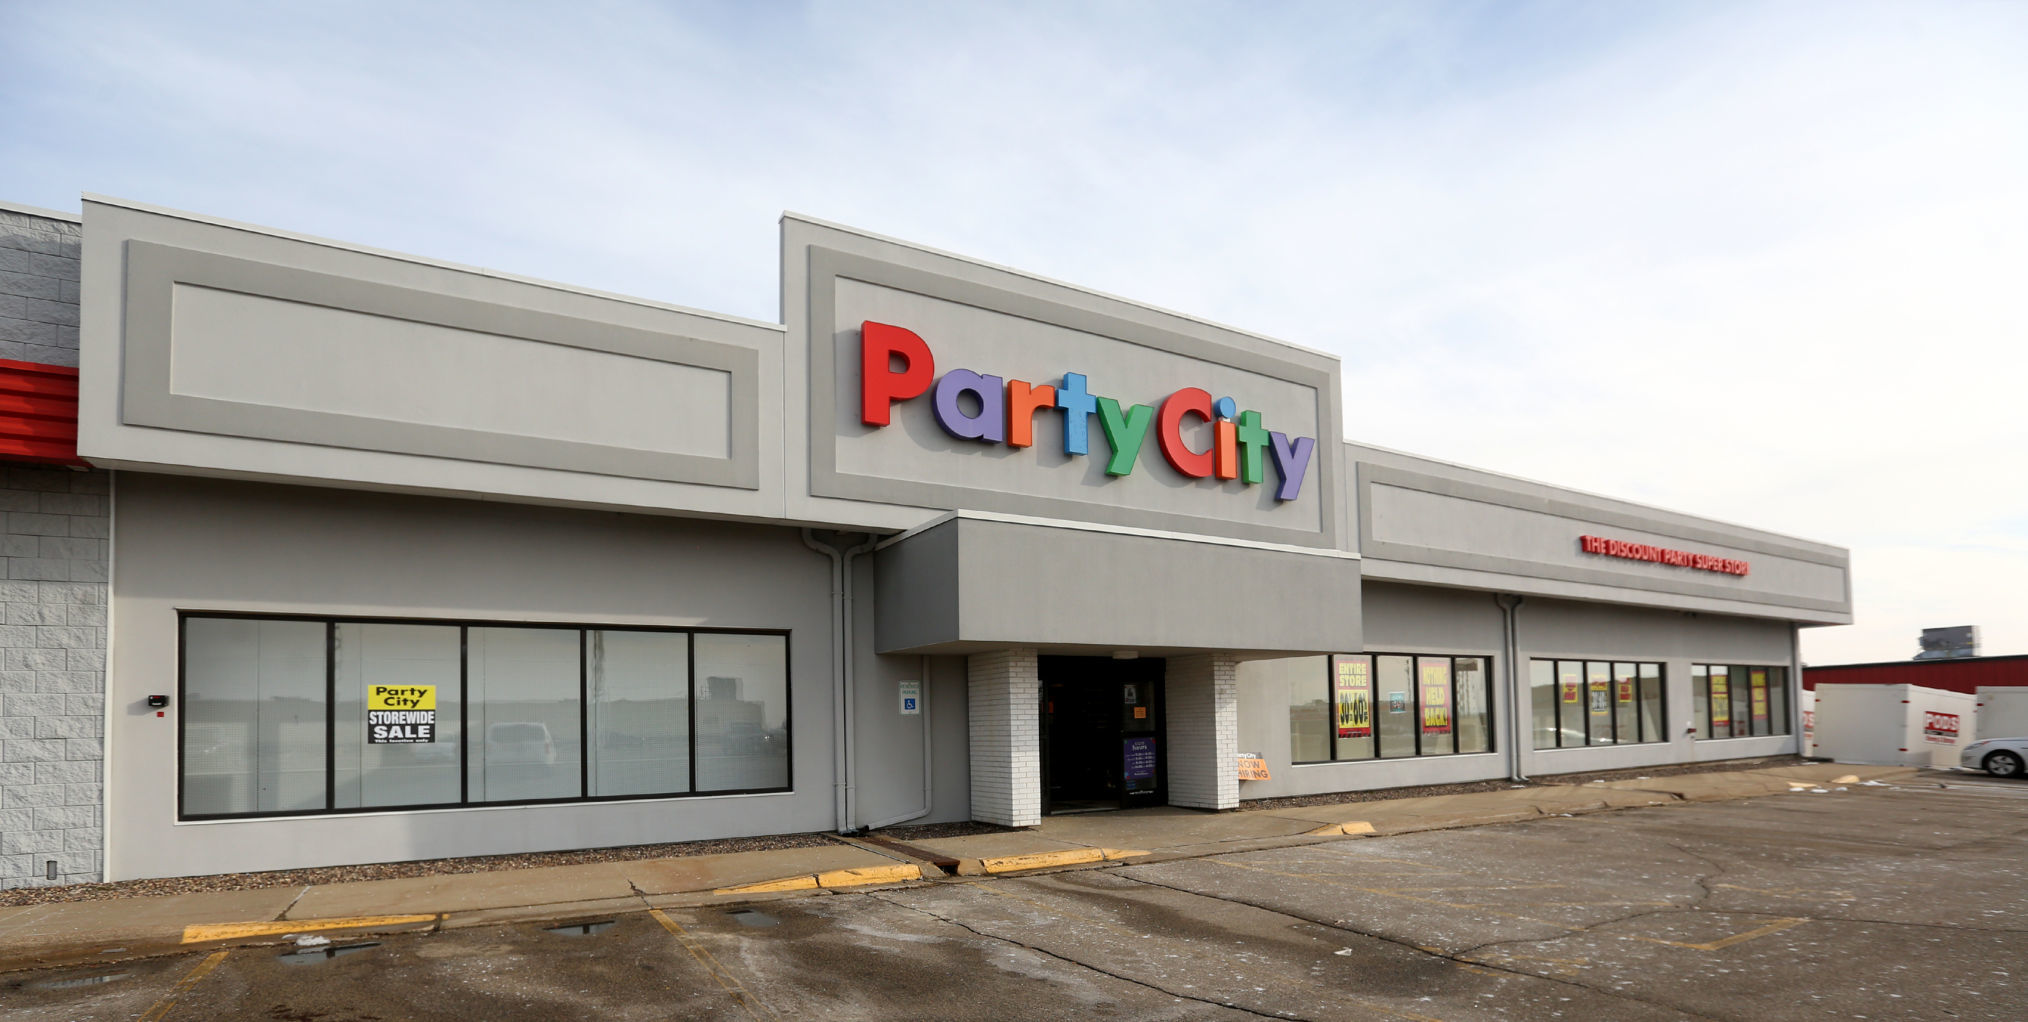 Party City in Dubuque will close in February. PHOTO CREDIT: JESSICA REILLY